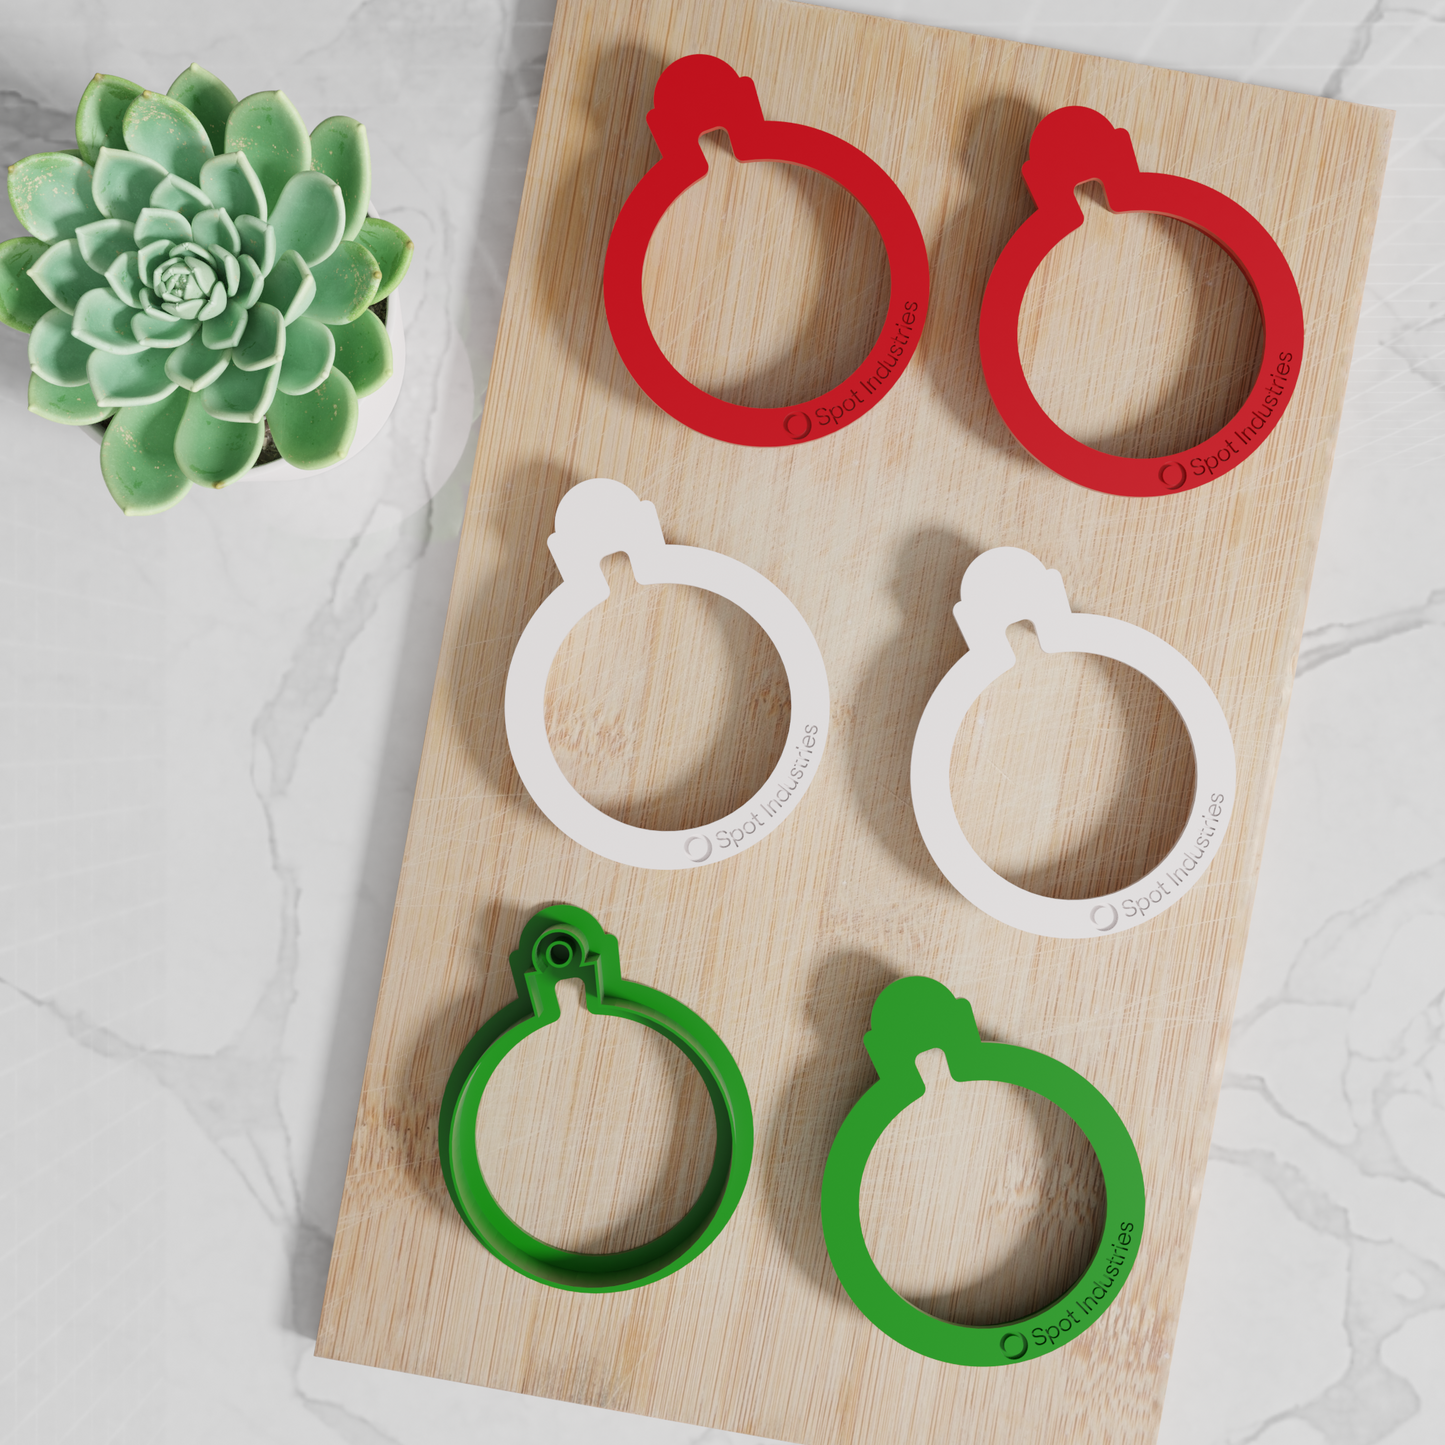 Easy Grip Holiday Ball Cookie Cutter Set For Kids & Adults! Custom Sizes, Multiple Colors. Work As Clay Cutter And Fondant Cutter Too!